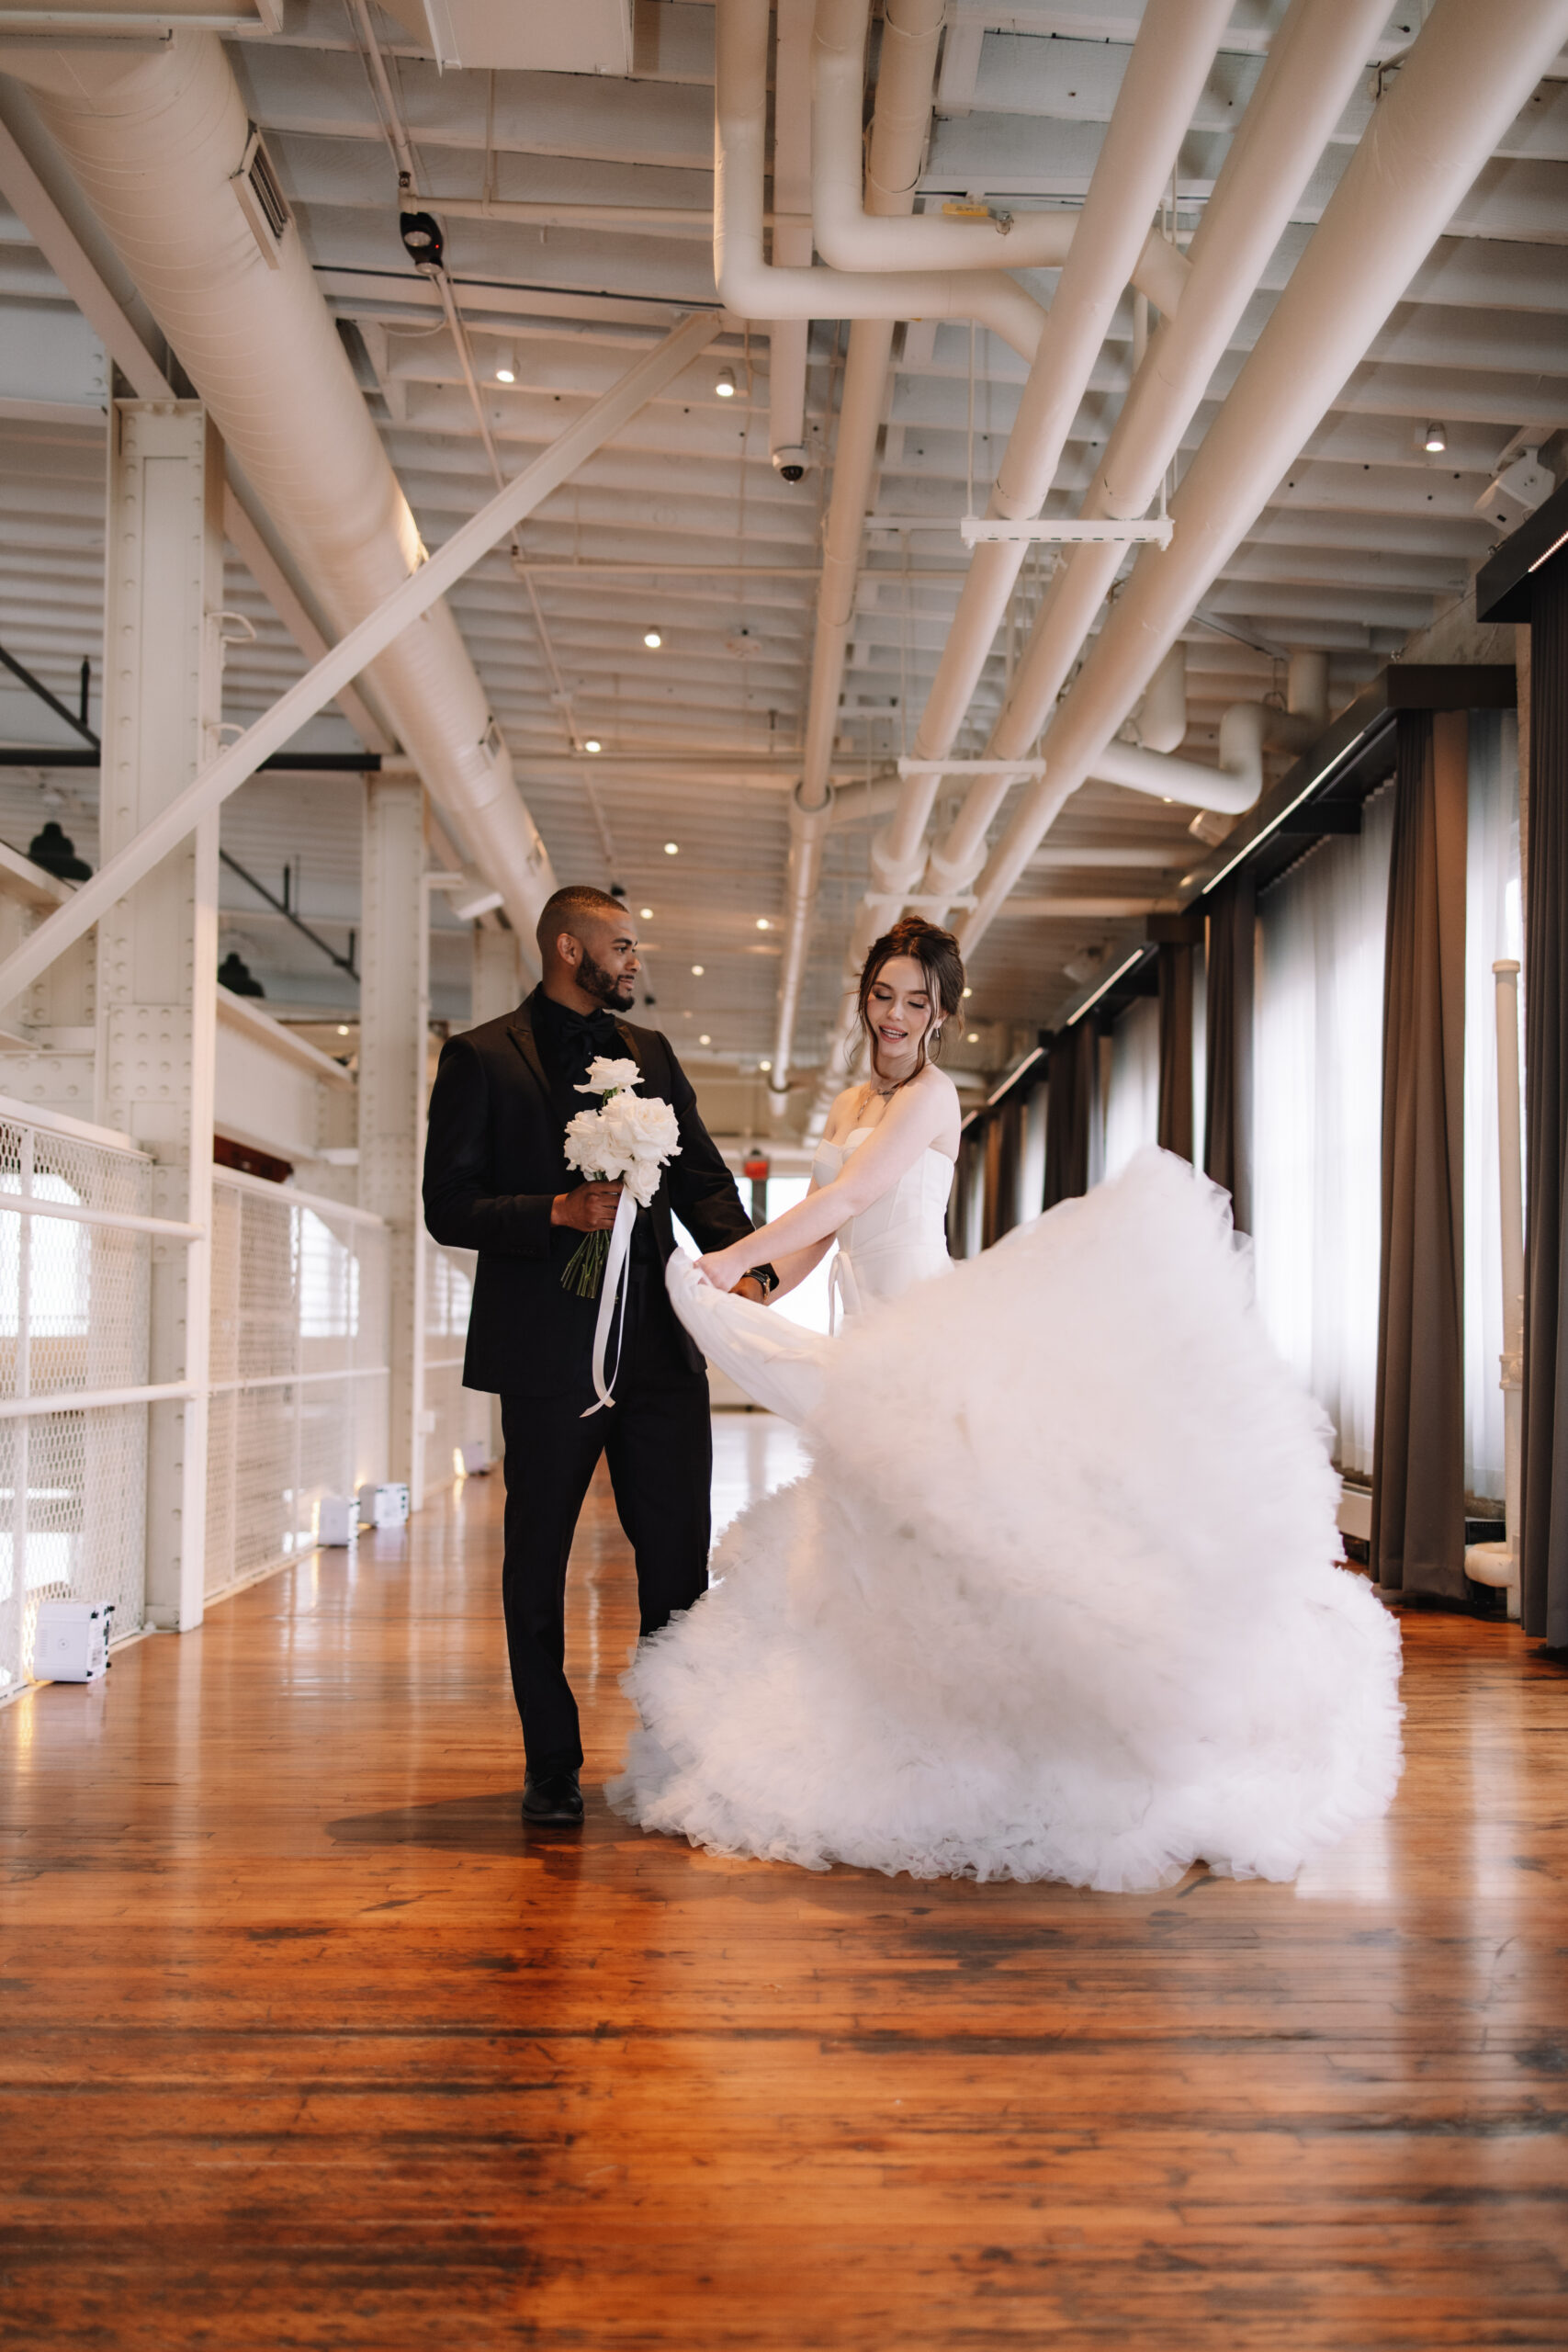 A couple in wedding attire dances in a bright, industrial-style venue. The bride's gown flares out as she twirls, and the groom holds a bouquet of flowers in The Machine Shop in Minneapolis